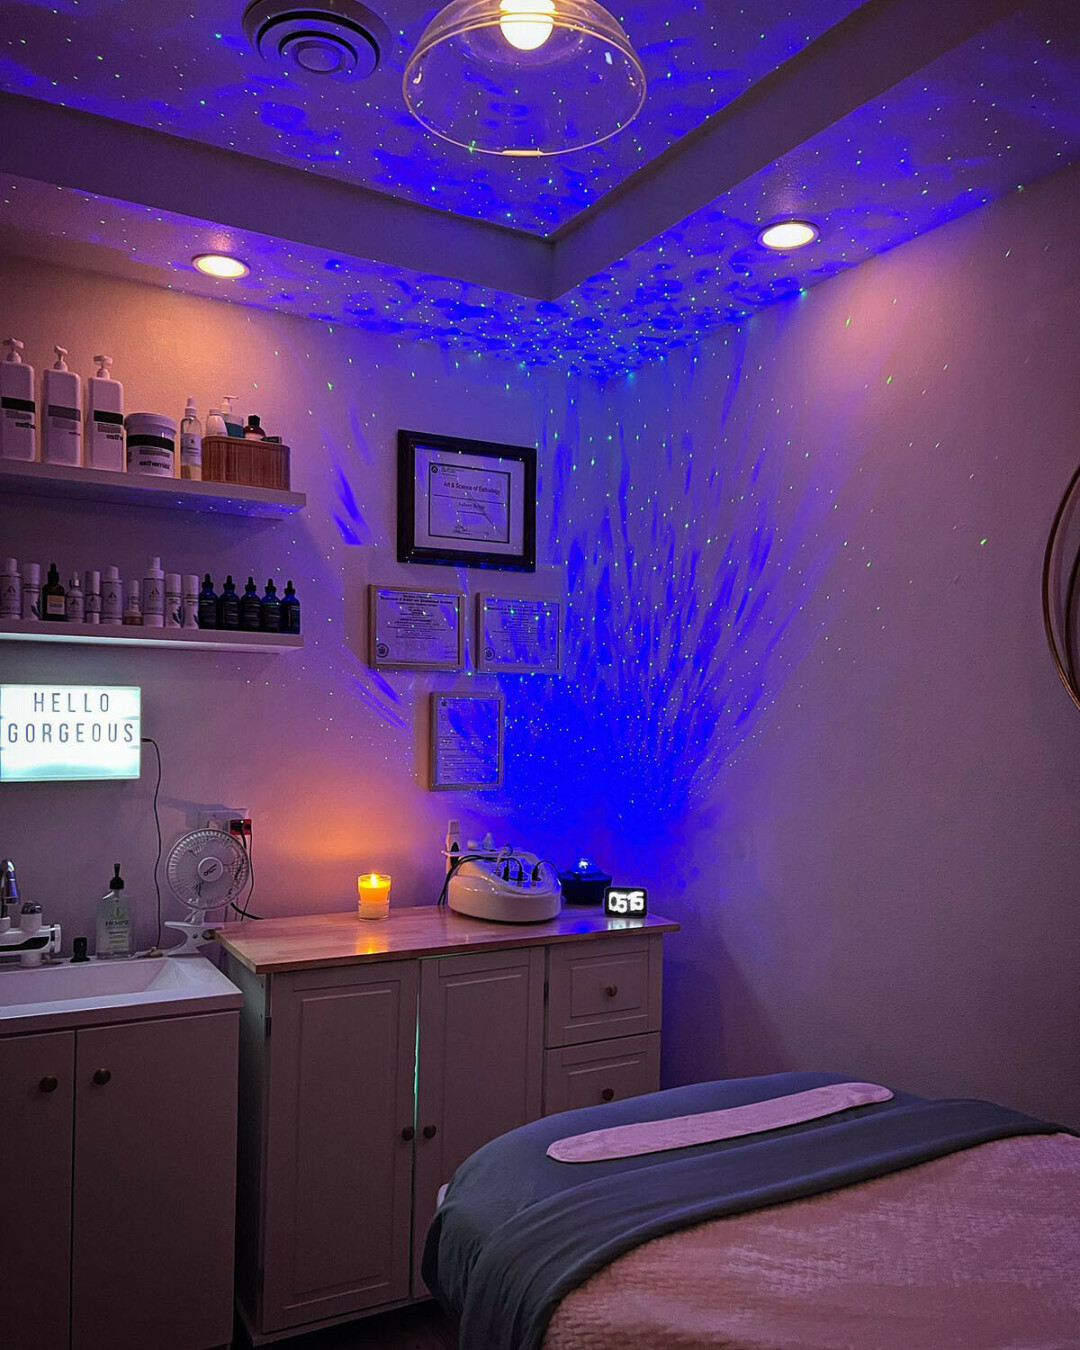 DREAM ON. The relaxing atmosphere inside Bel Aesthetics. (Submitted photo)